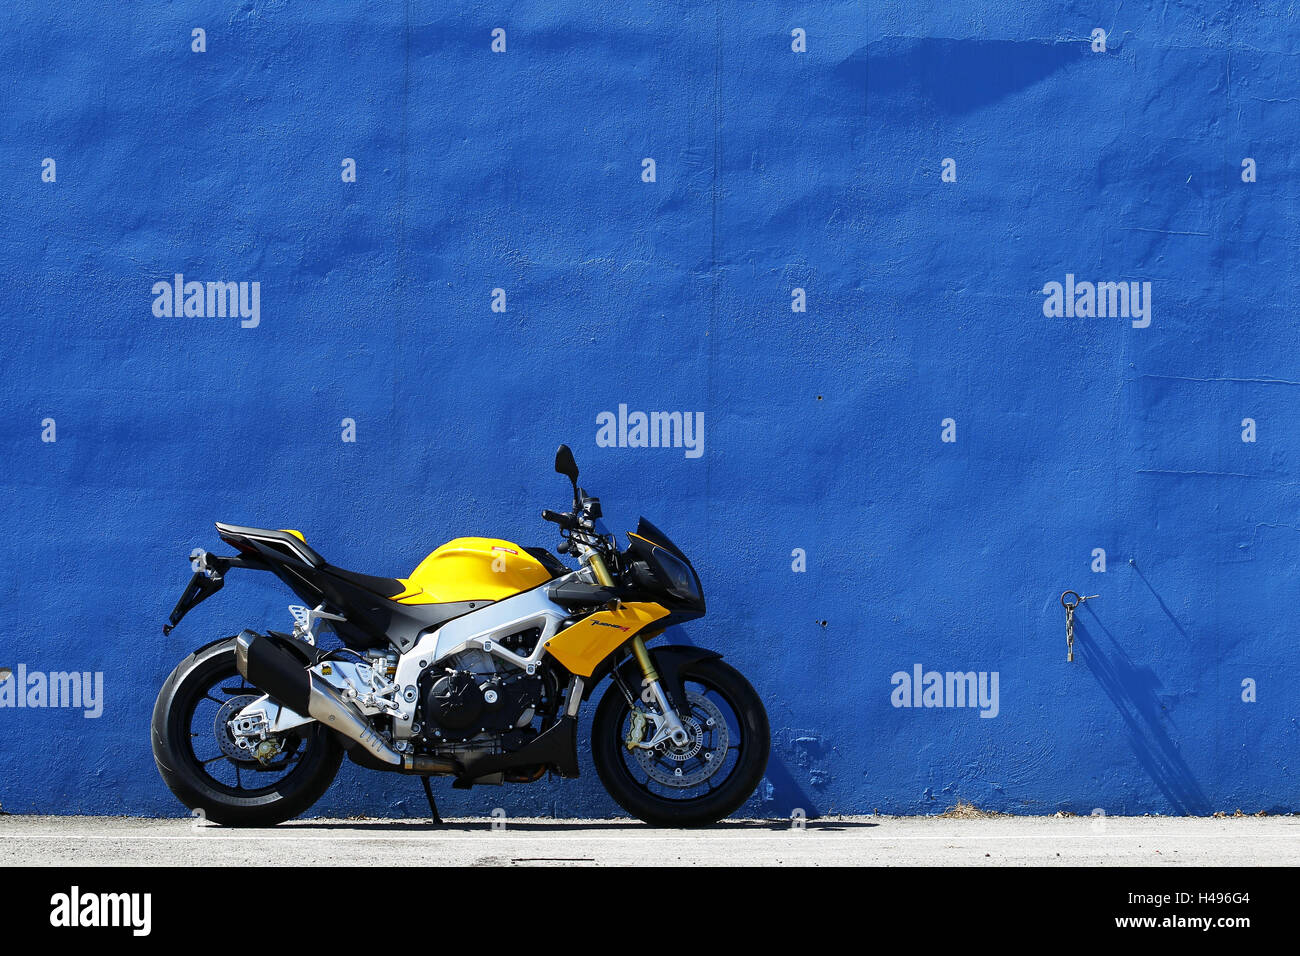 Motorcycle, Tuono V4R, yellow, right side, standing, in front of blue wall, Stock Photo